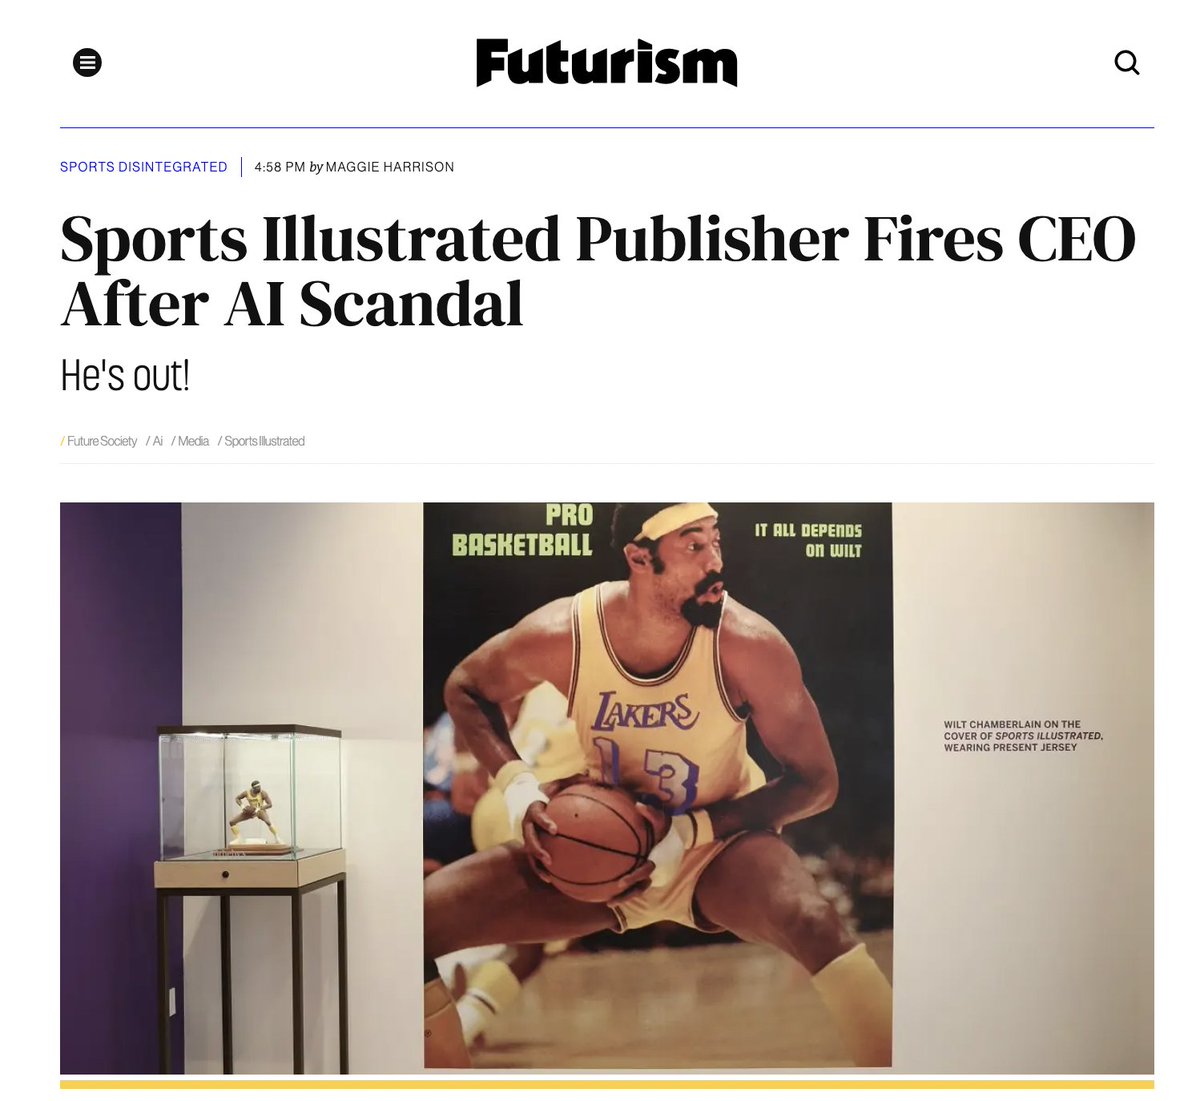 WELP. Following Futurism's reporting on Sports Illustrated's use of AI — and the subsequent fallout — as of 4:30PM today, Ross Levinsohn is OUT as CEO of The Arena Group. He will be replaced by The Five-Hour Energy Guy. futurism.com/sports-illustr…